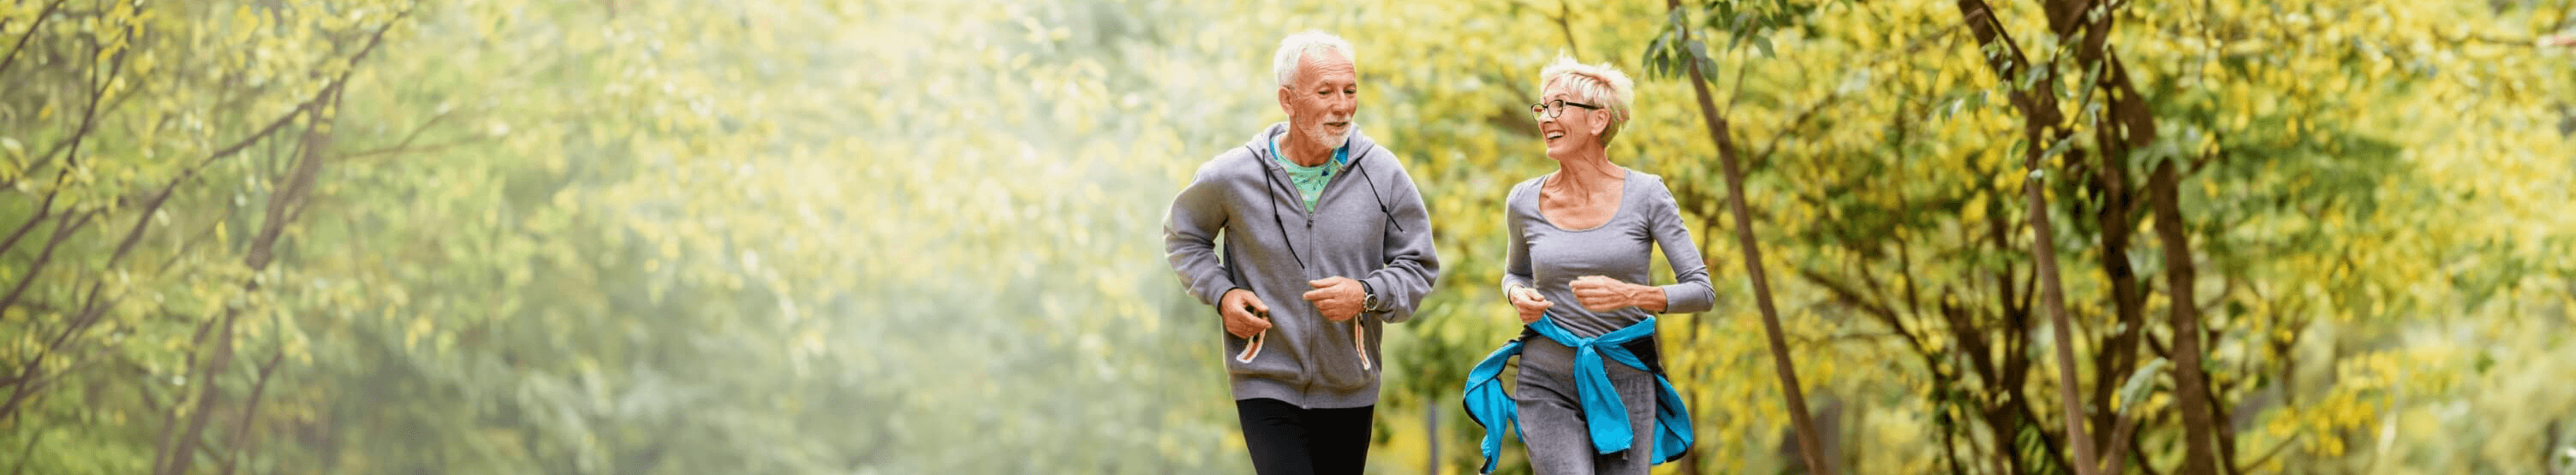 old couple jogging